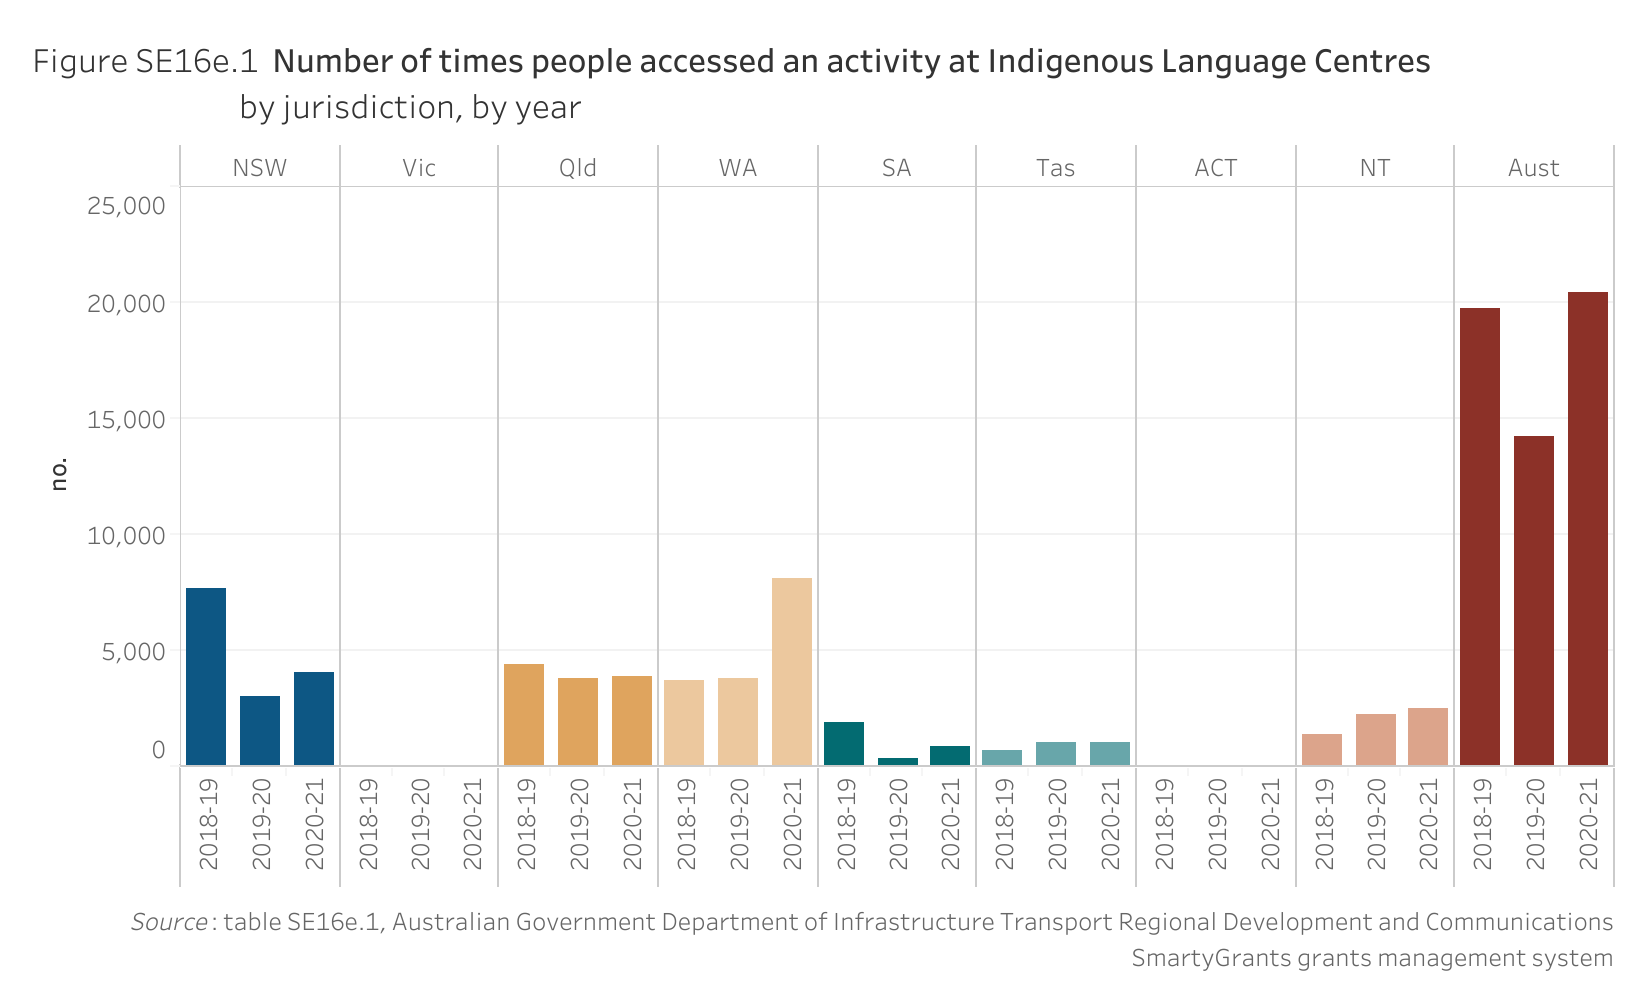 Figure SE16e.1. Bar chart showing the number of times people accessed an activity at Indigenous Language Centres, by jurisdiction and by year. Data table of figure SE16e.1 is below.